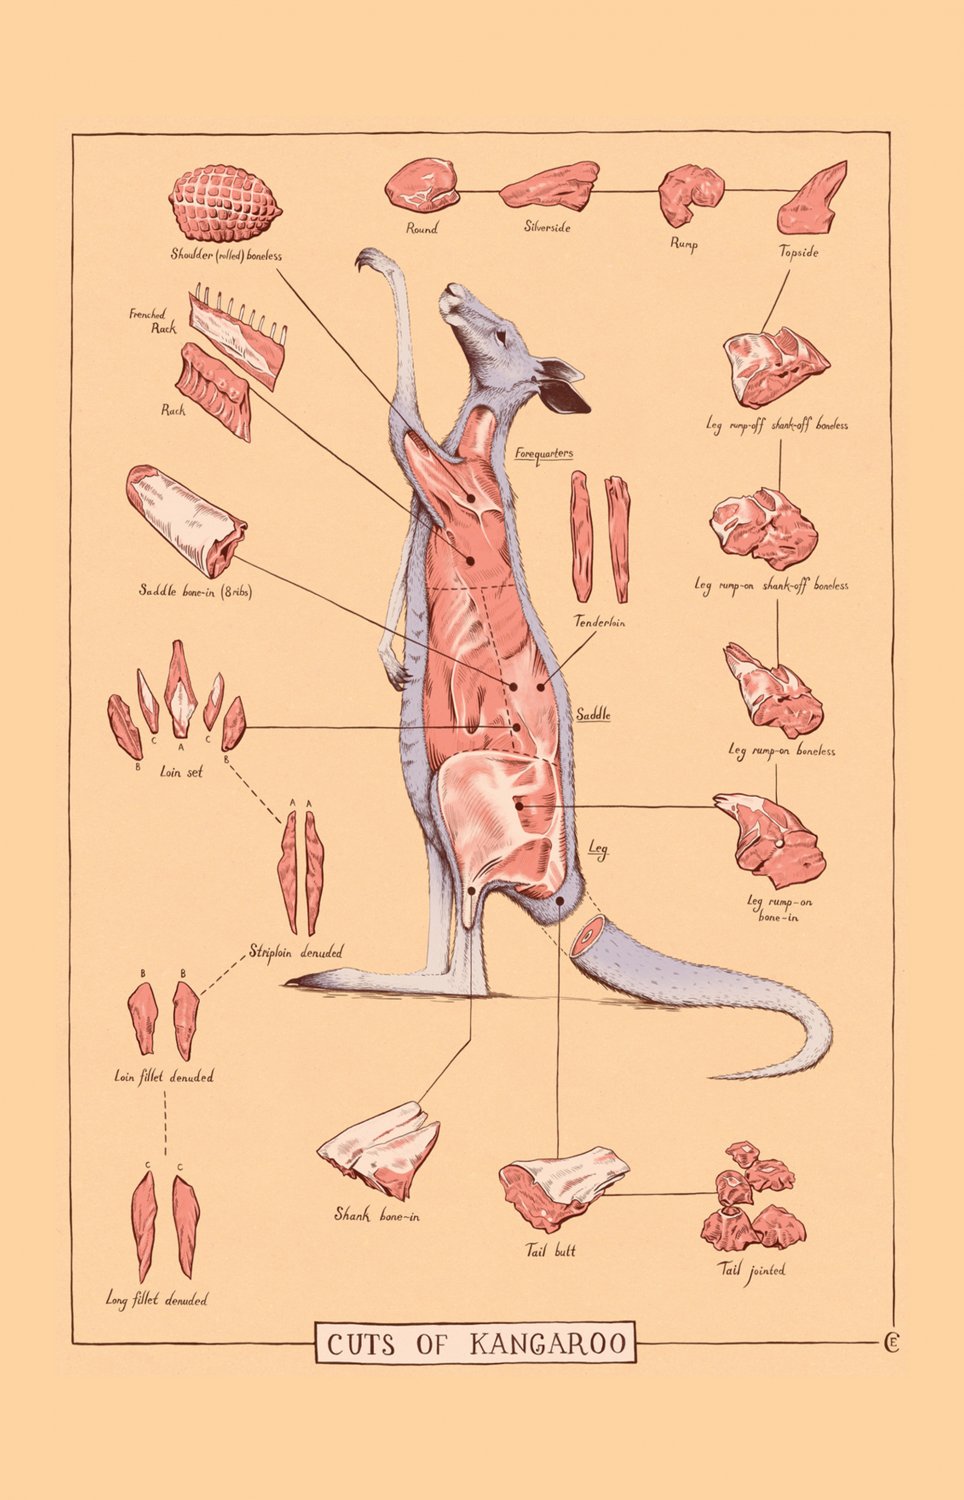 Cuts of Kangaroo Meat Chart 13"x19" (32cm/49cm) Polyester Fabric Poster